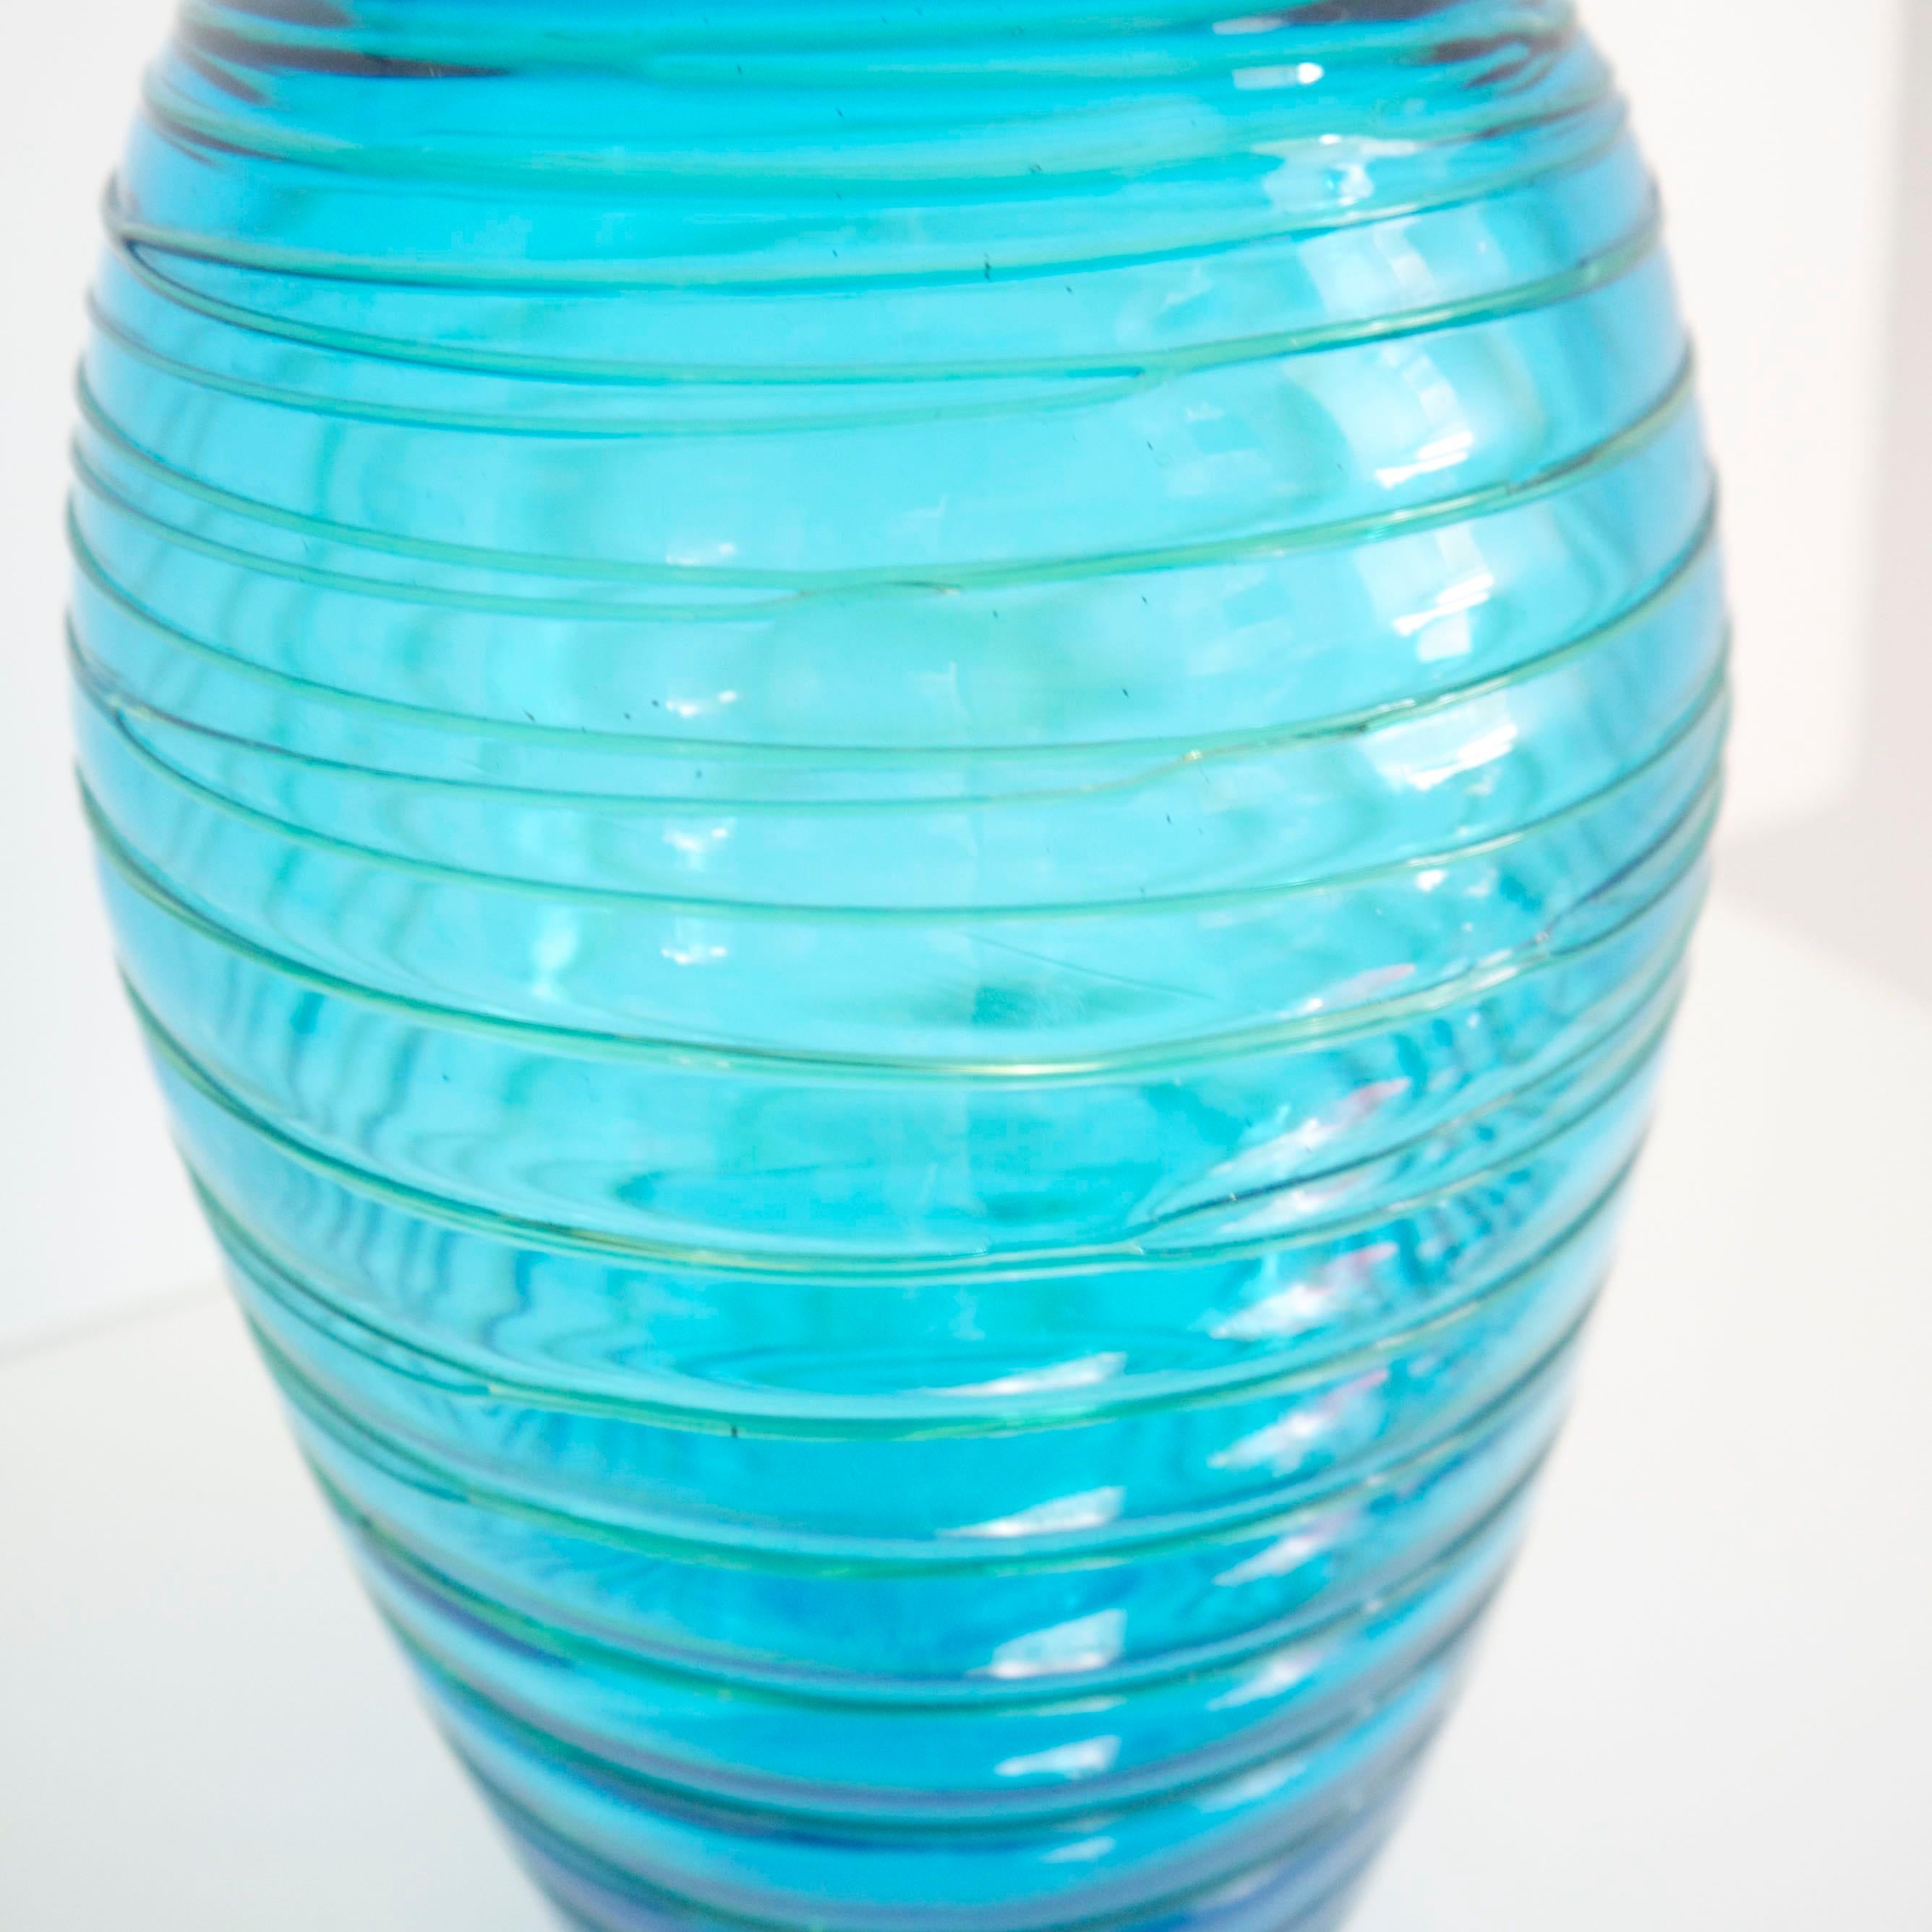 Late 20th Century Fulvio Bianconi for Venini 1970s Turquoise Vase with Applied Lines For Sale